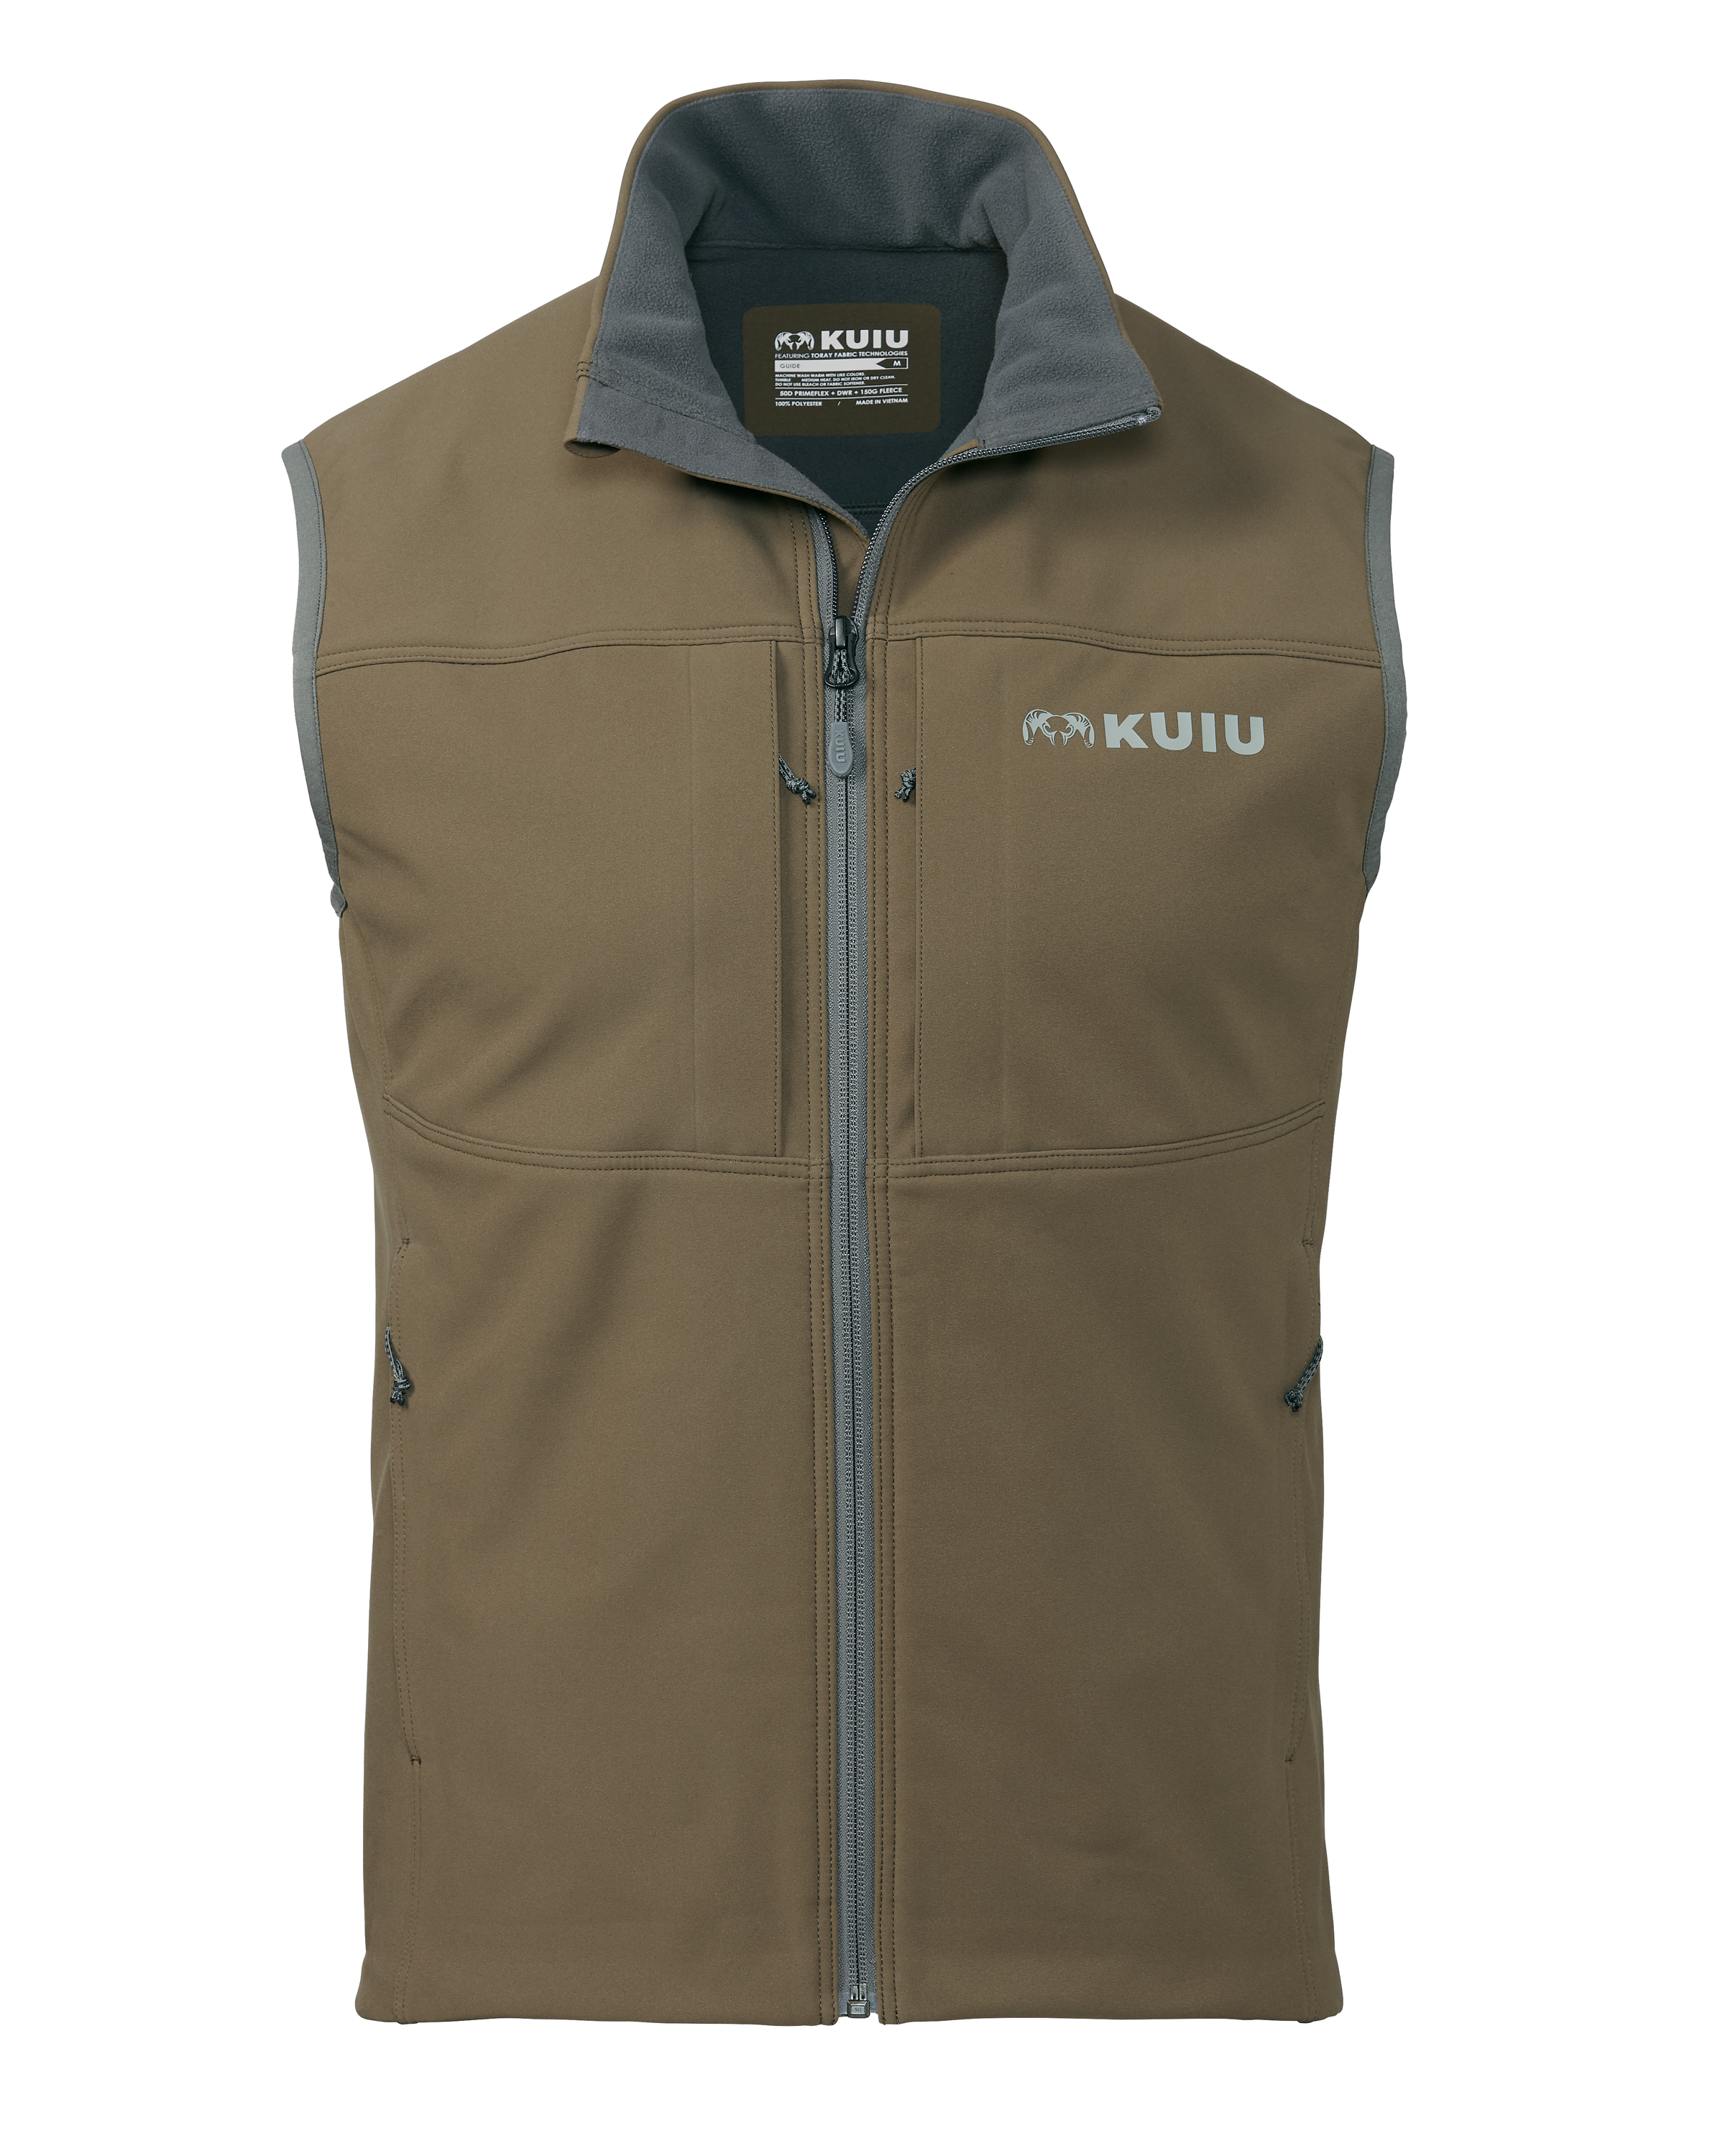 KUIU Guide DCS Hunting Vest in Bourbon | Size Large